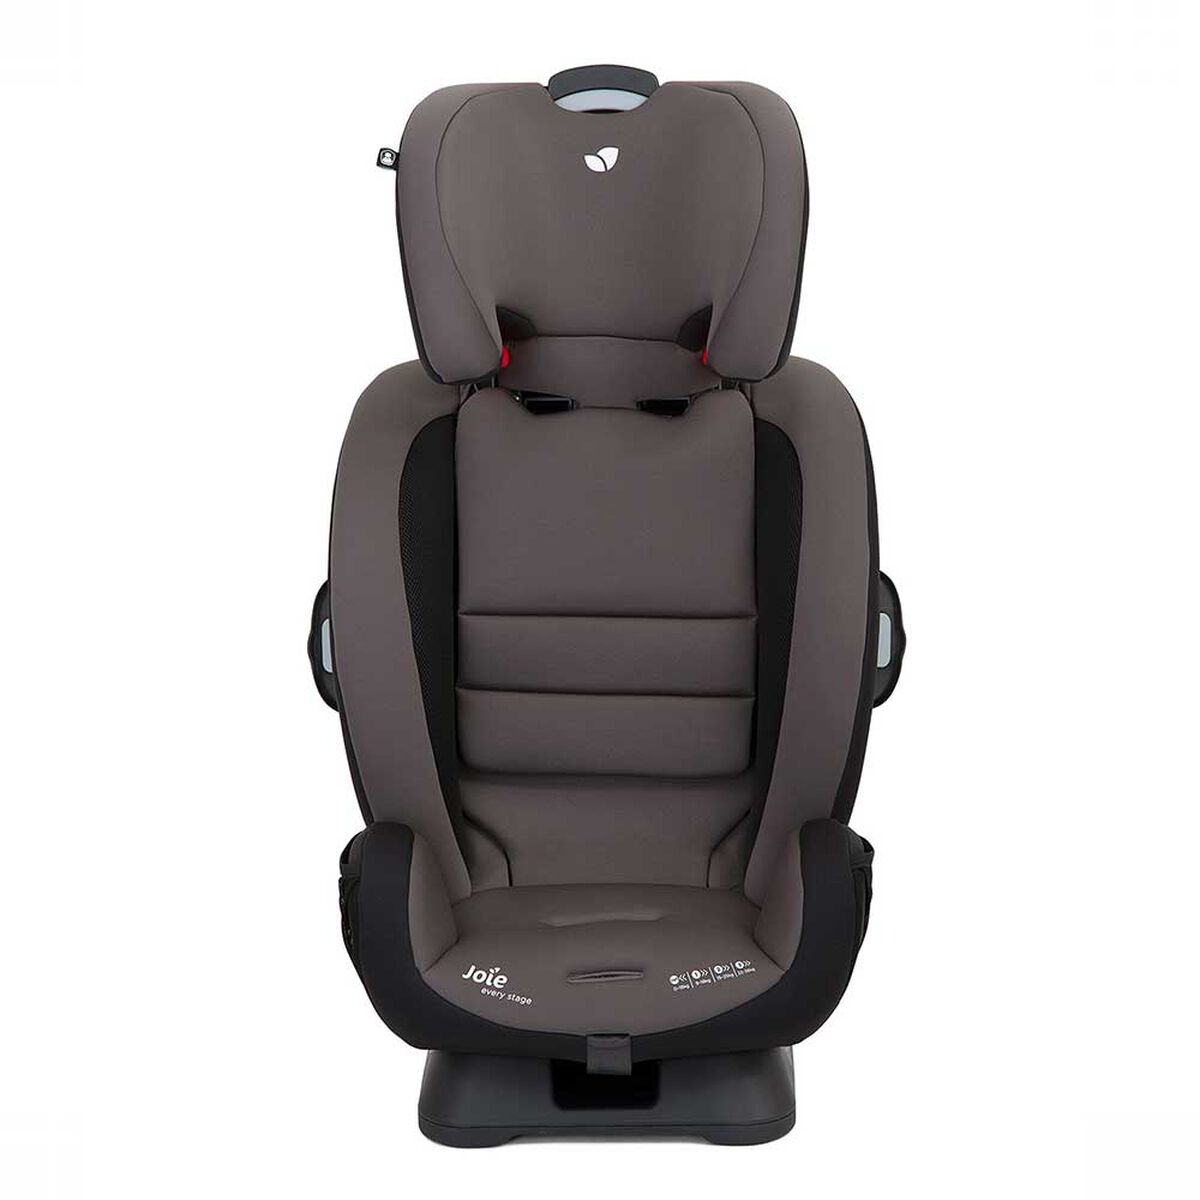 Silla de Auto Convertible Every Stage Ember Joie